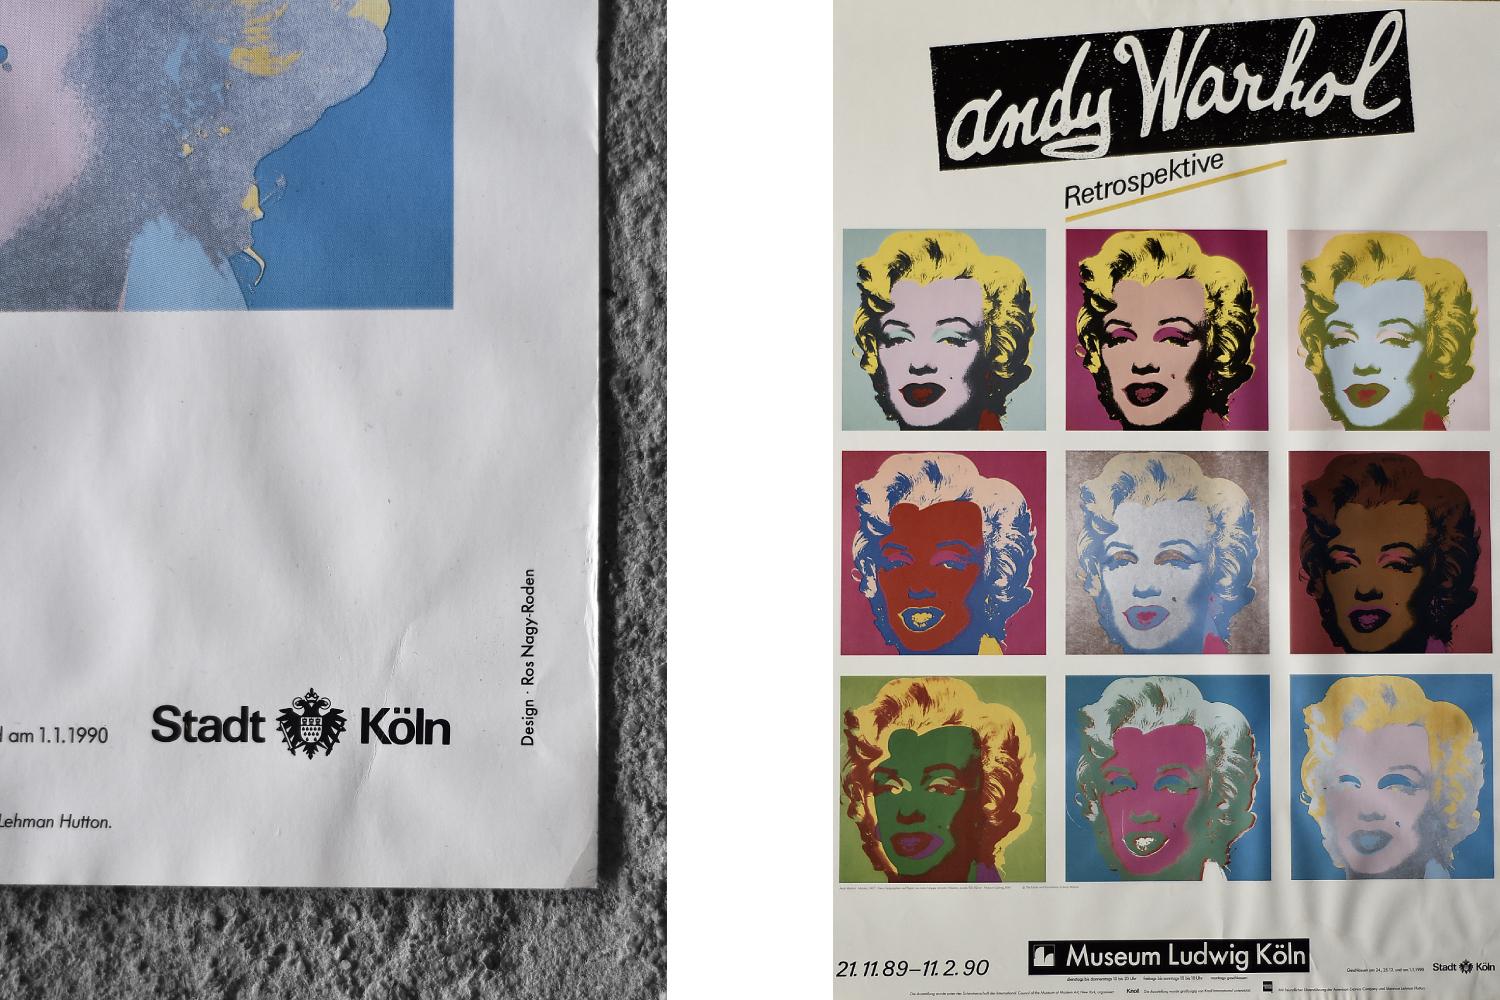 German Original Poster from the Andy Warhol Exhibition, Marilyn Monroe RETROSPECTIVE For Sale